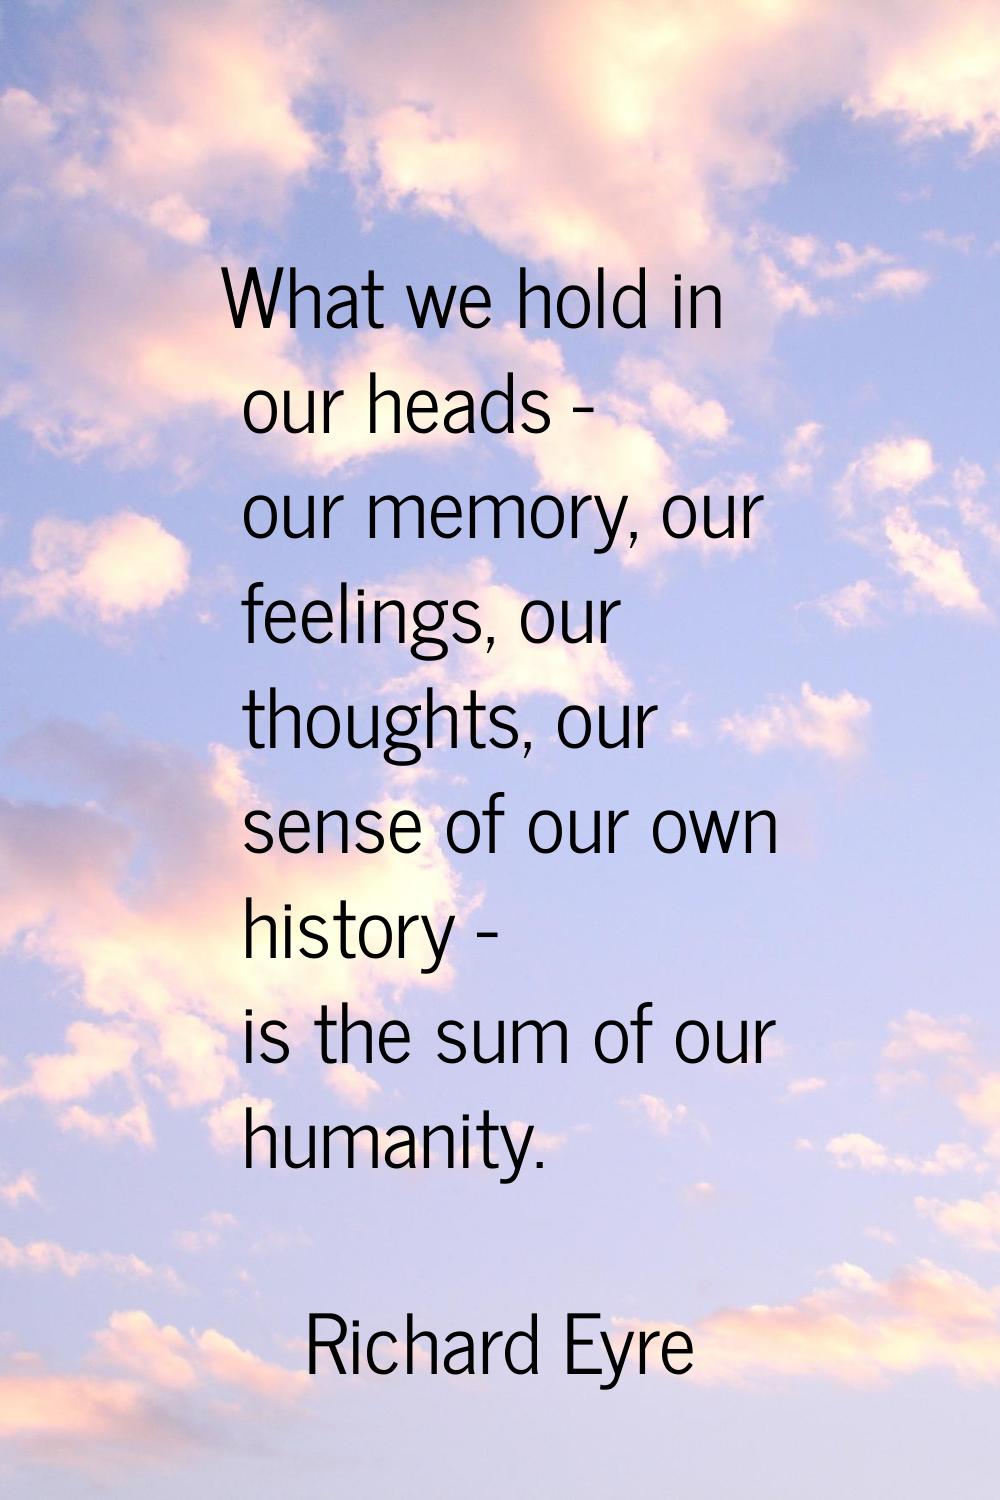 What we hold in our heads - our memory, our feelings, our thoughts, our sense of our own history - 